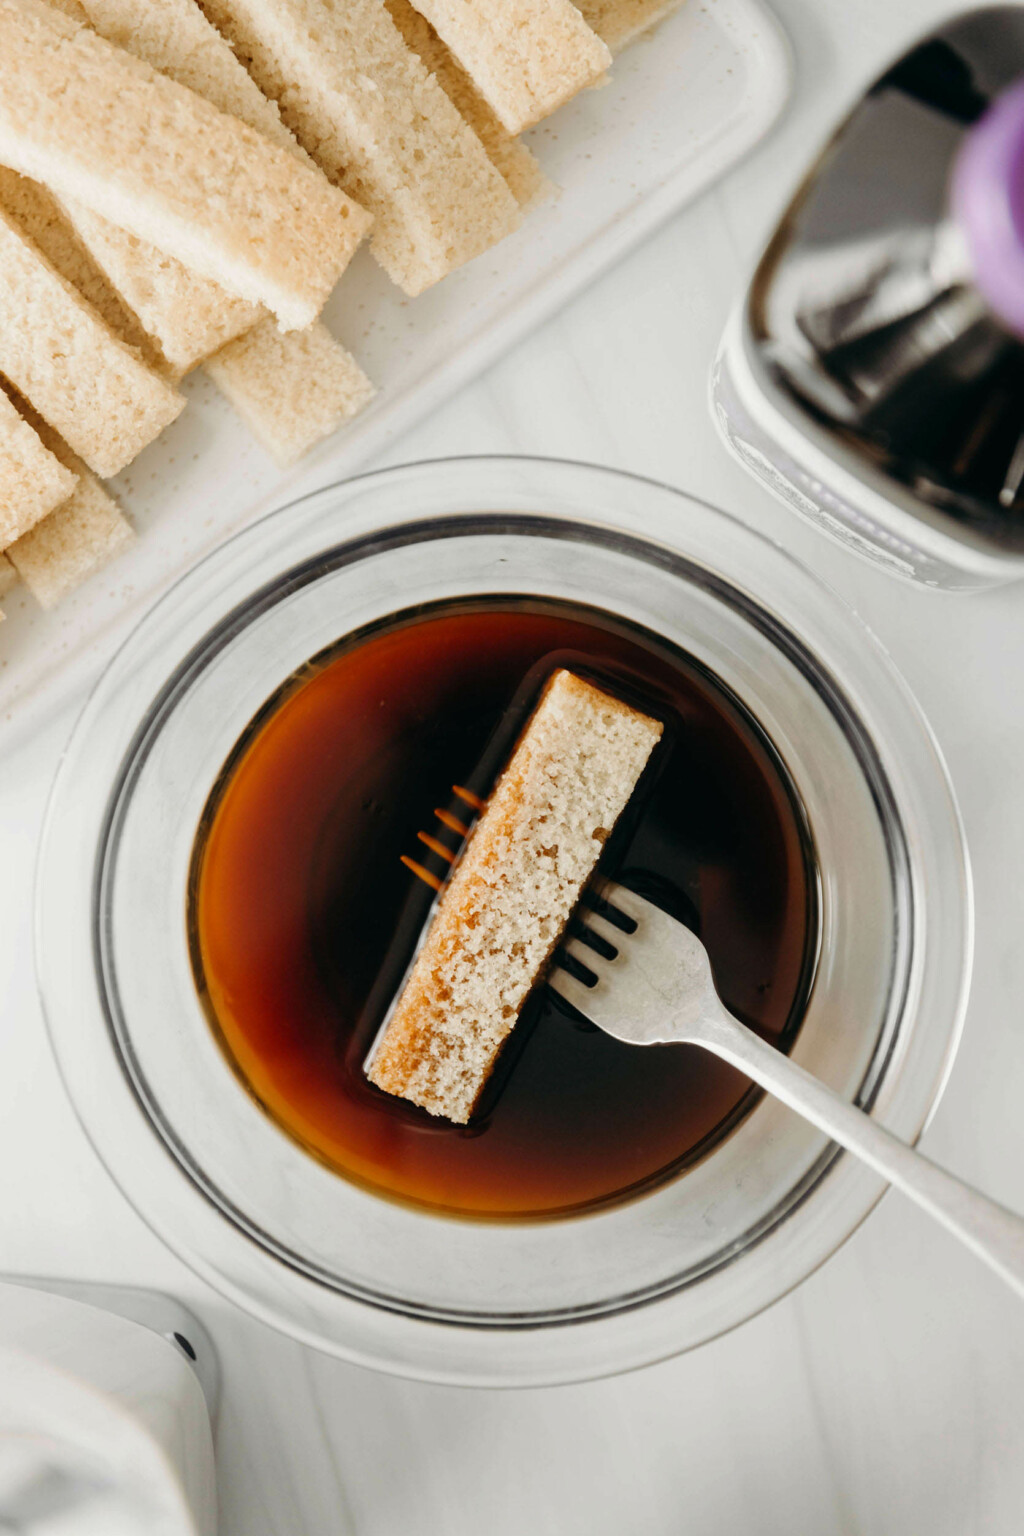 A rectangular slice of cake is being dipped into a mixture of coffee and liqueur. A fork suspends the cake in the liquid.